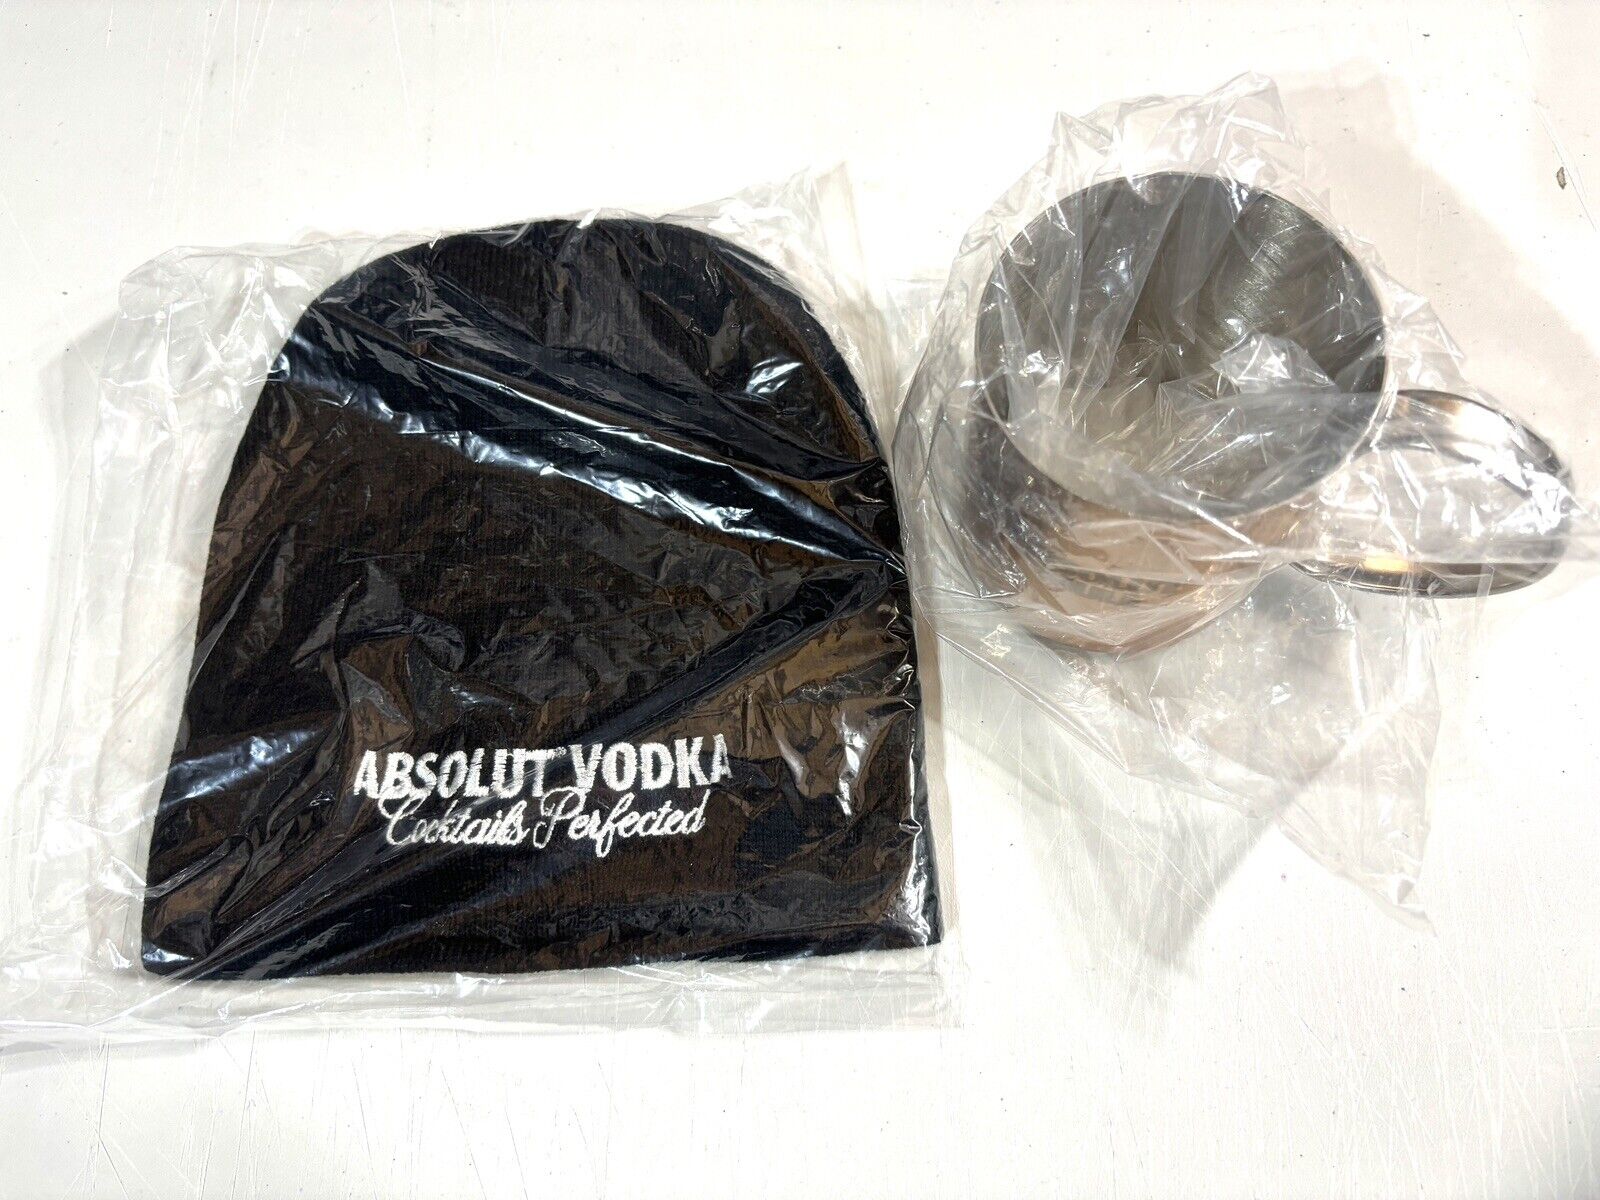 Absolut Vodka Cup And Cat Set Copper Mule Mug, Embroidered Beanie Knit Hat Black